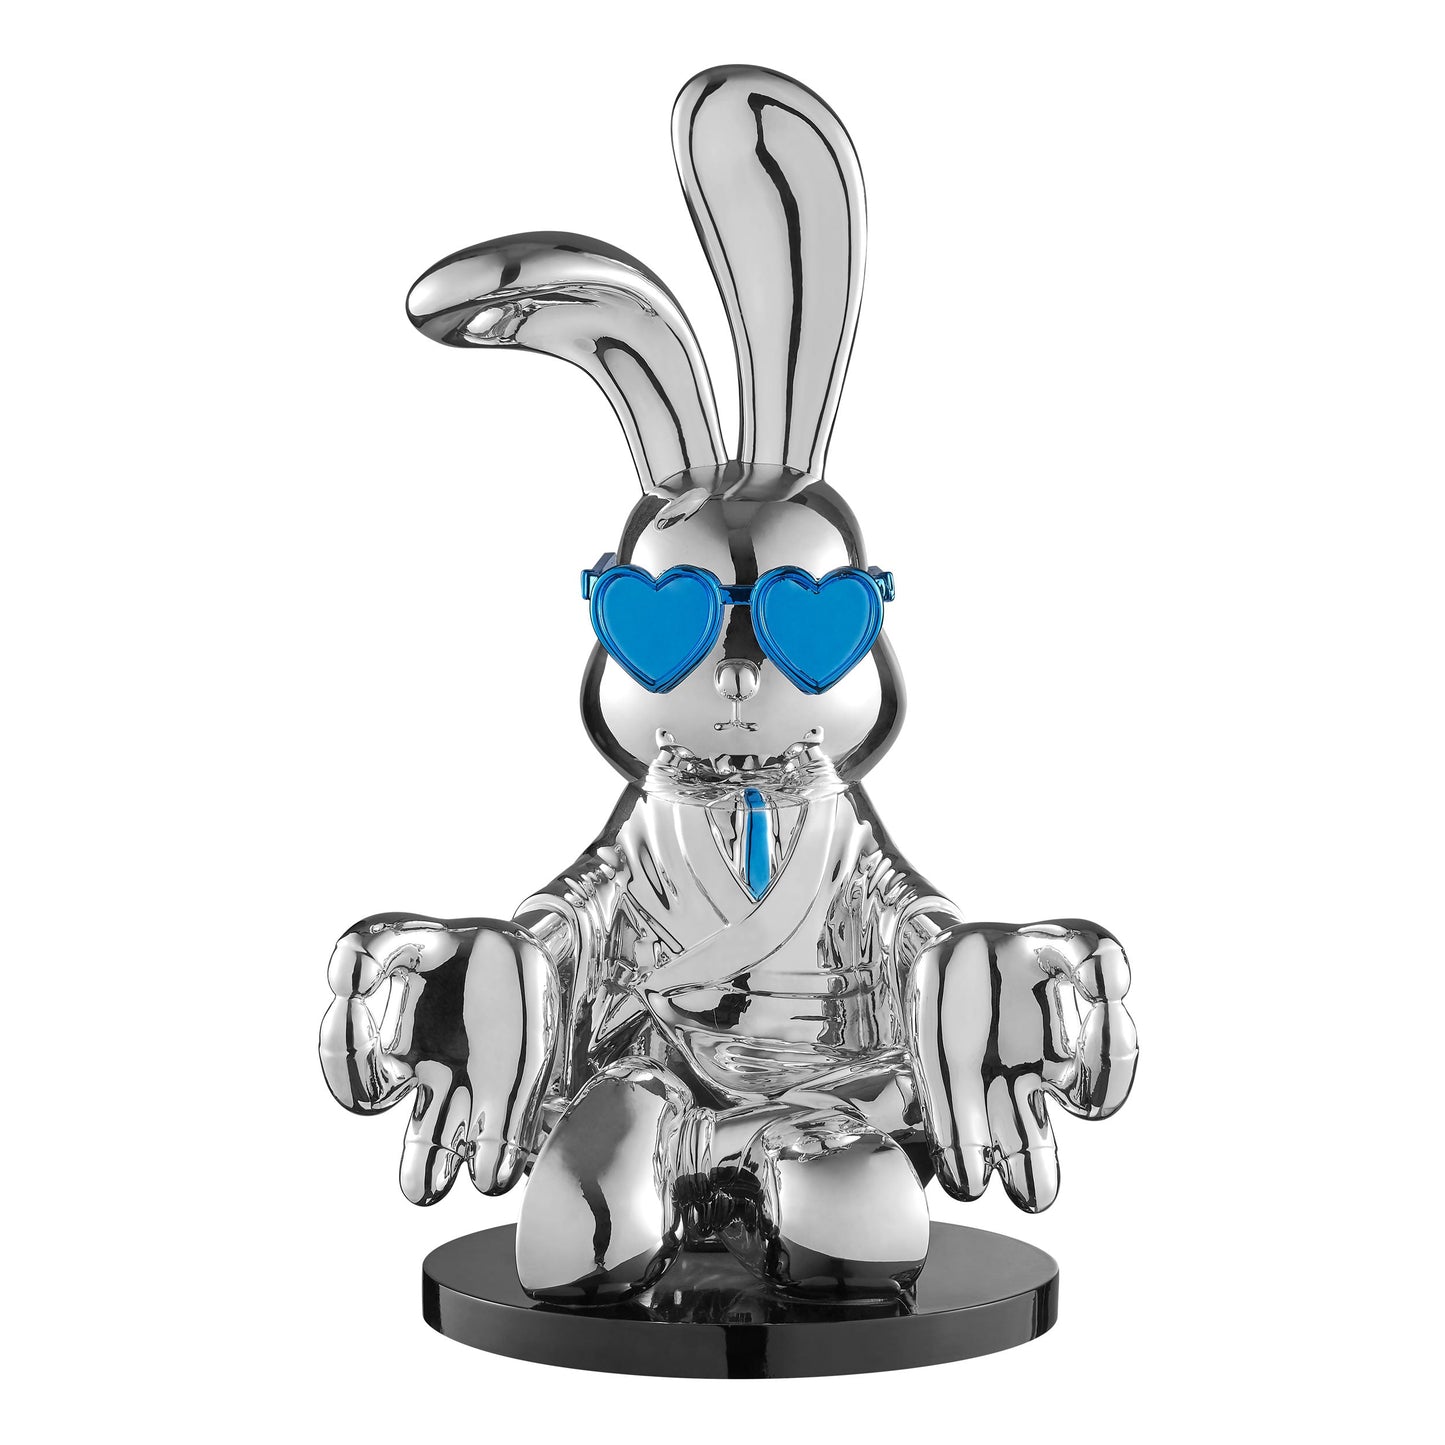 Sitting Rabbit with Blue Tie and Glasses